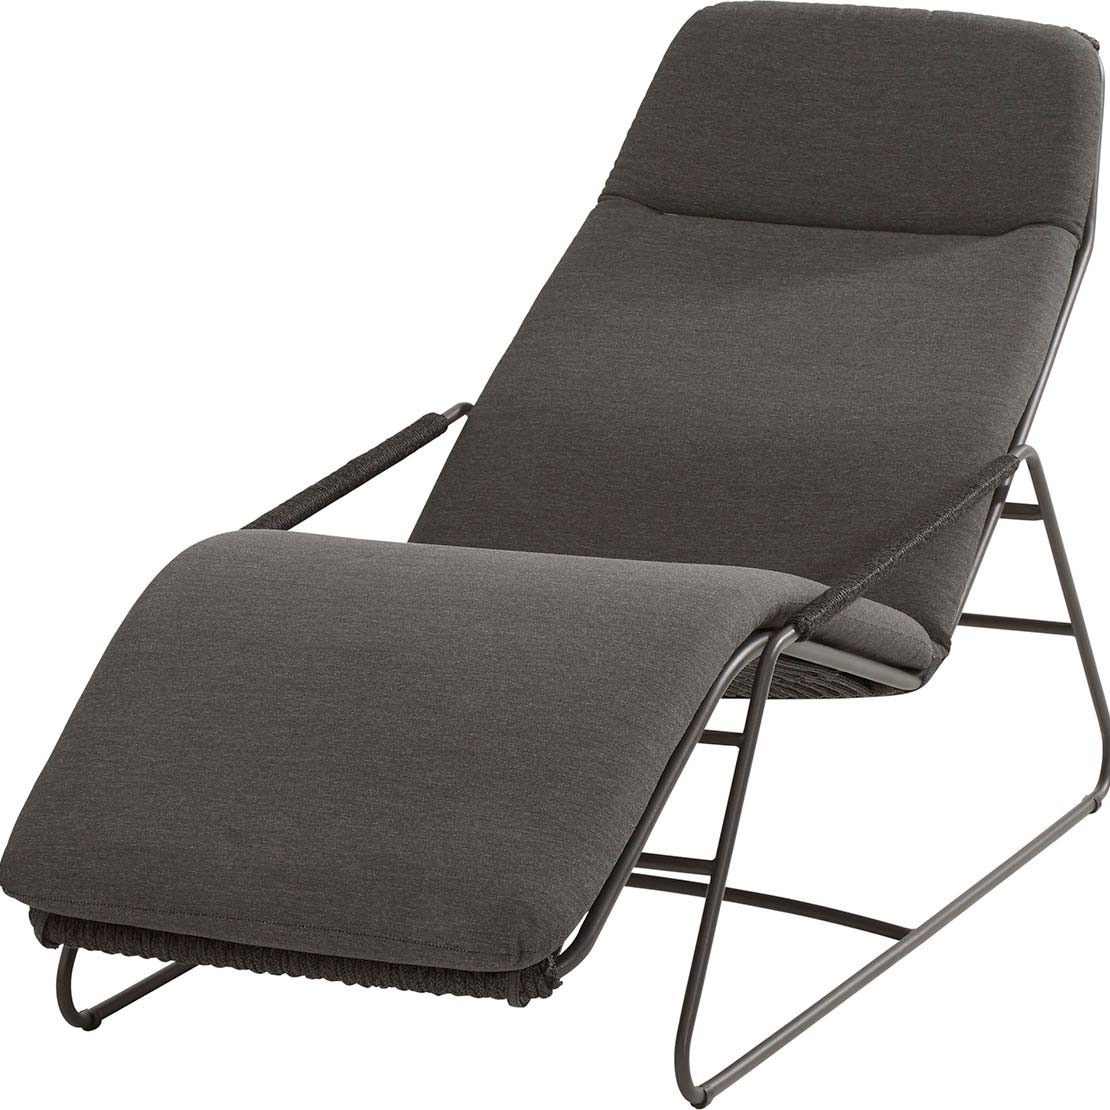 Elba sunlounger with cushion rope